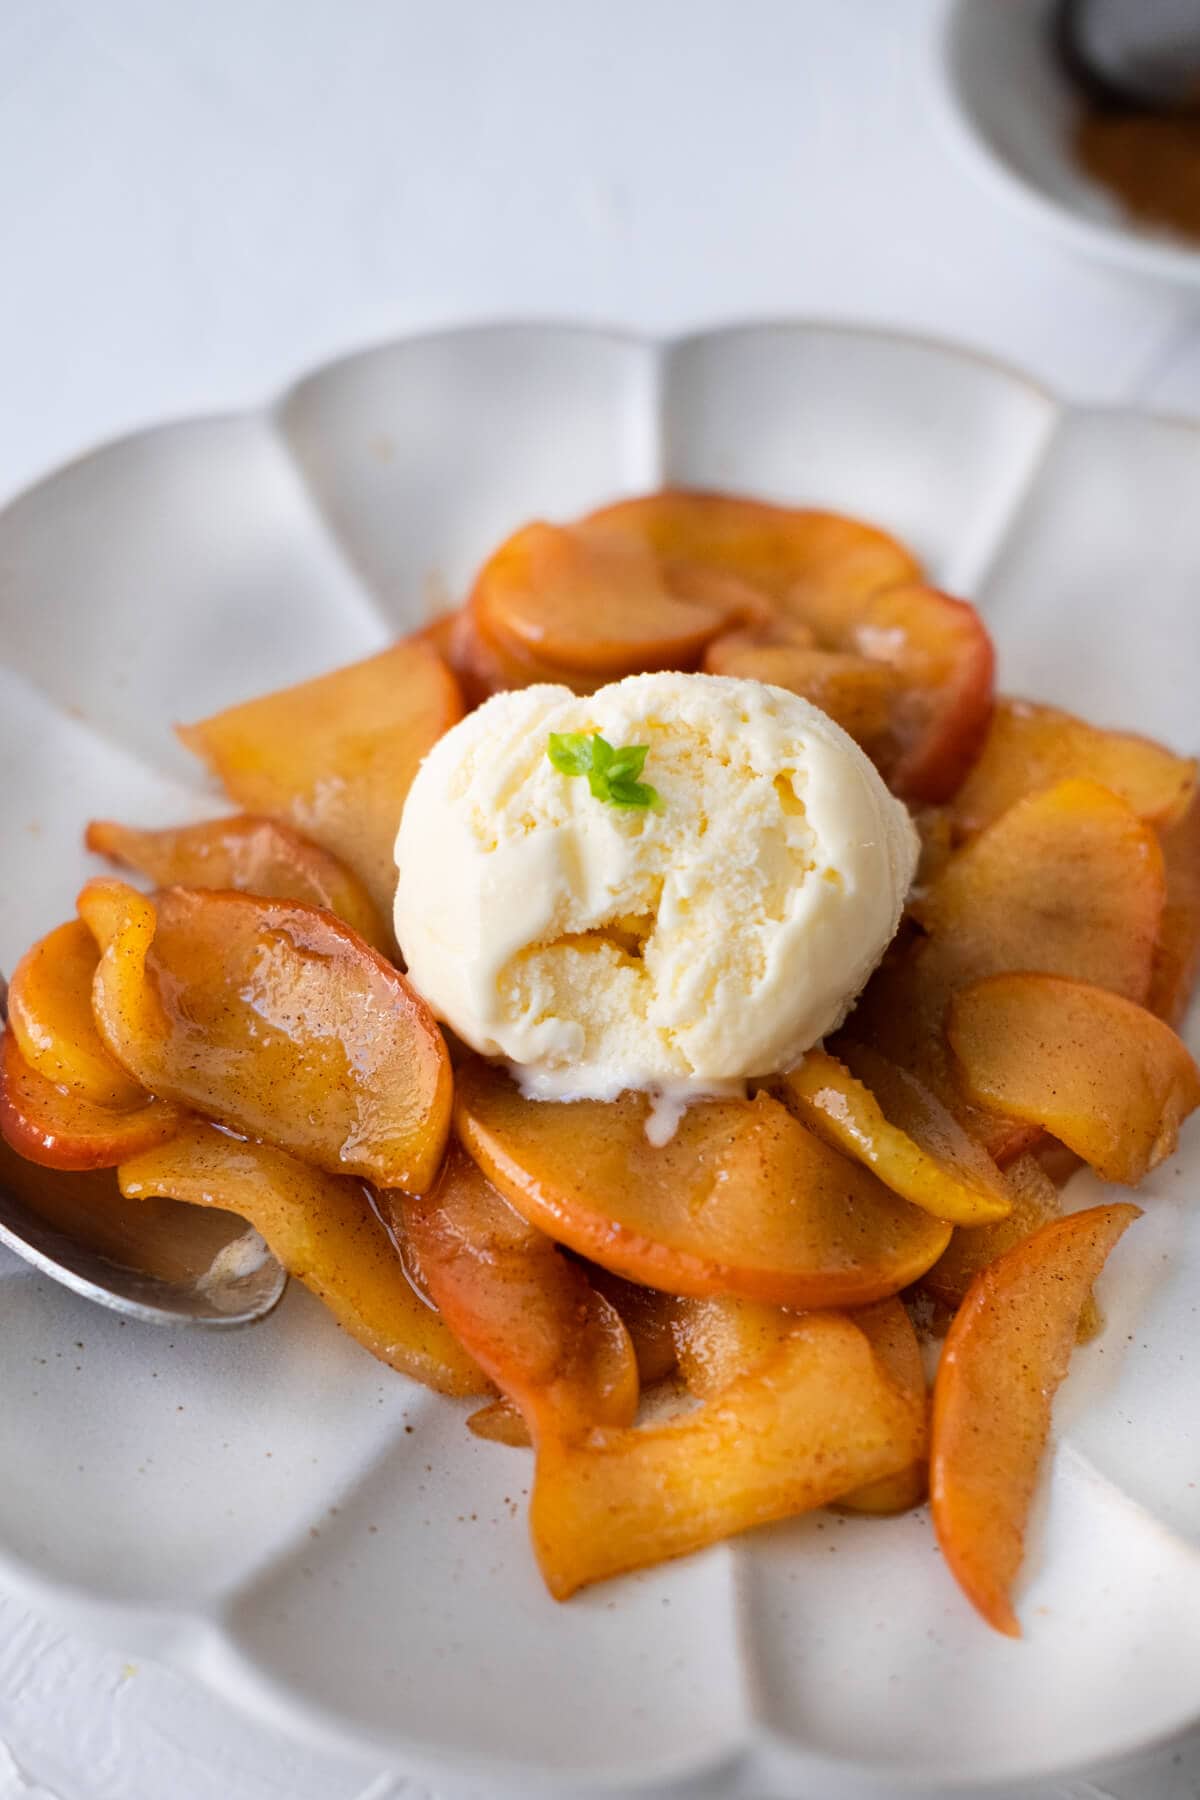 Fried apples with ice cream on top.